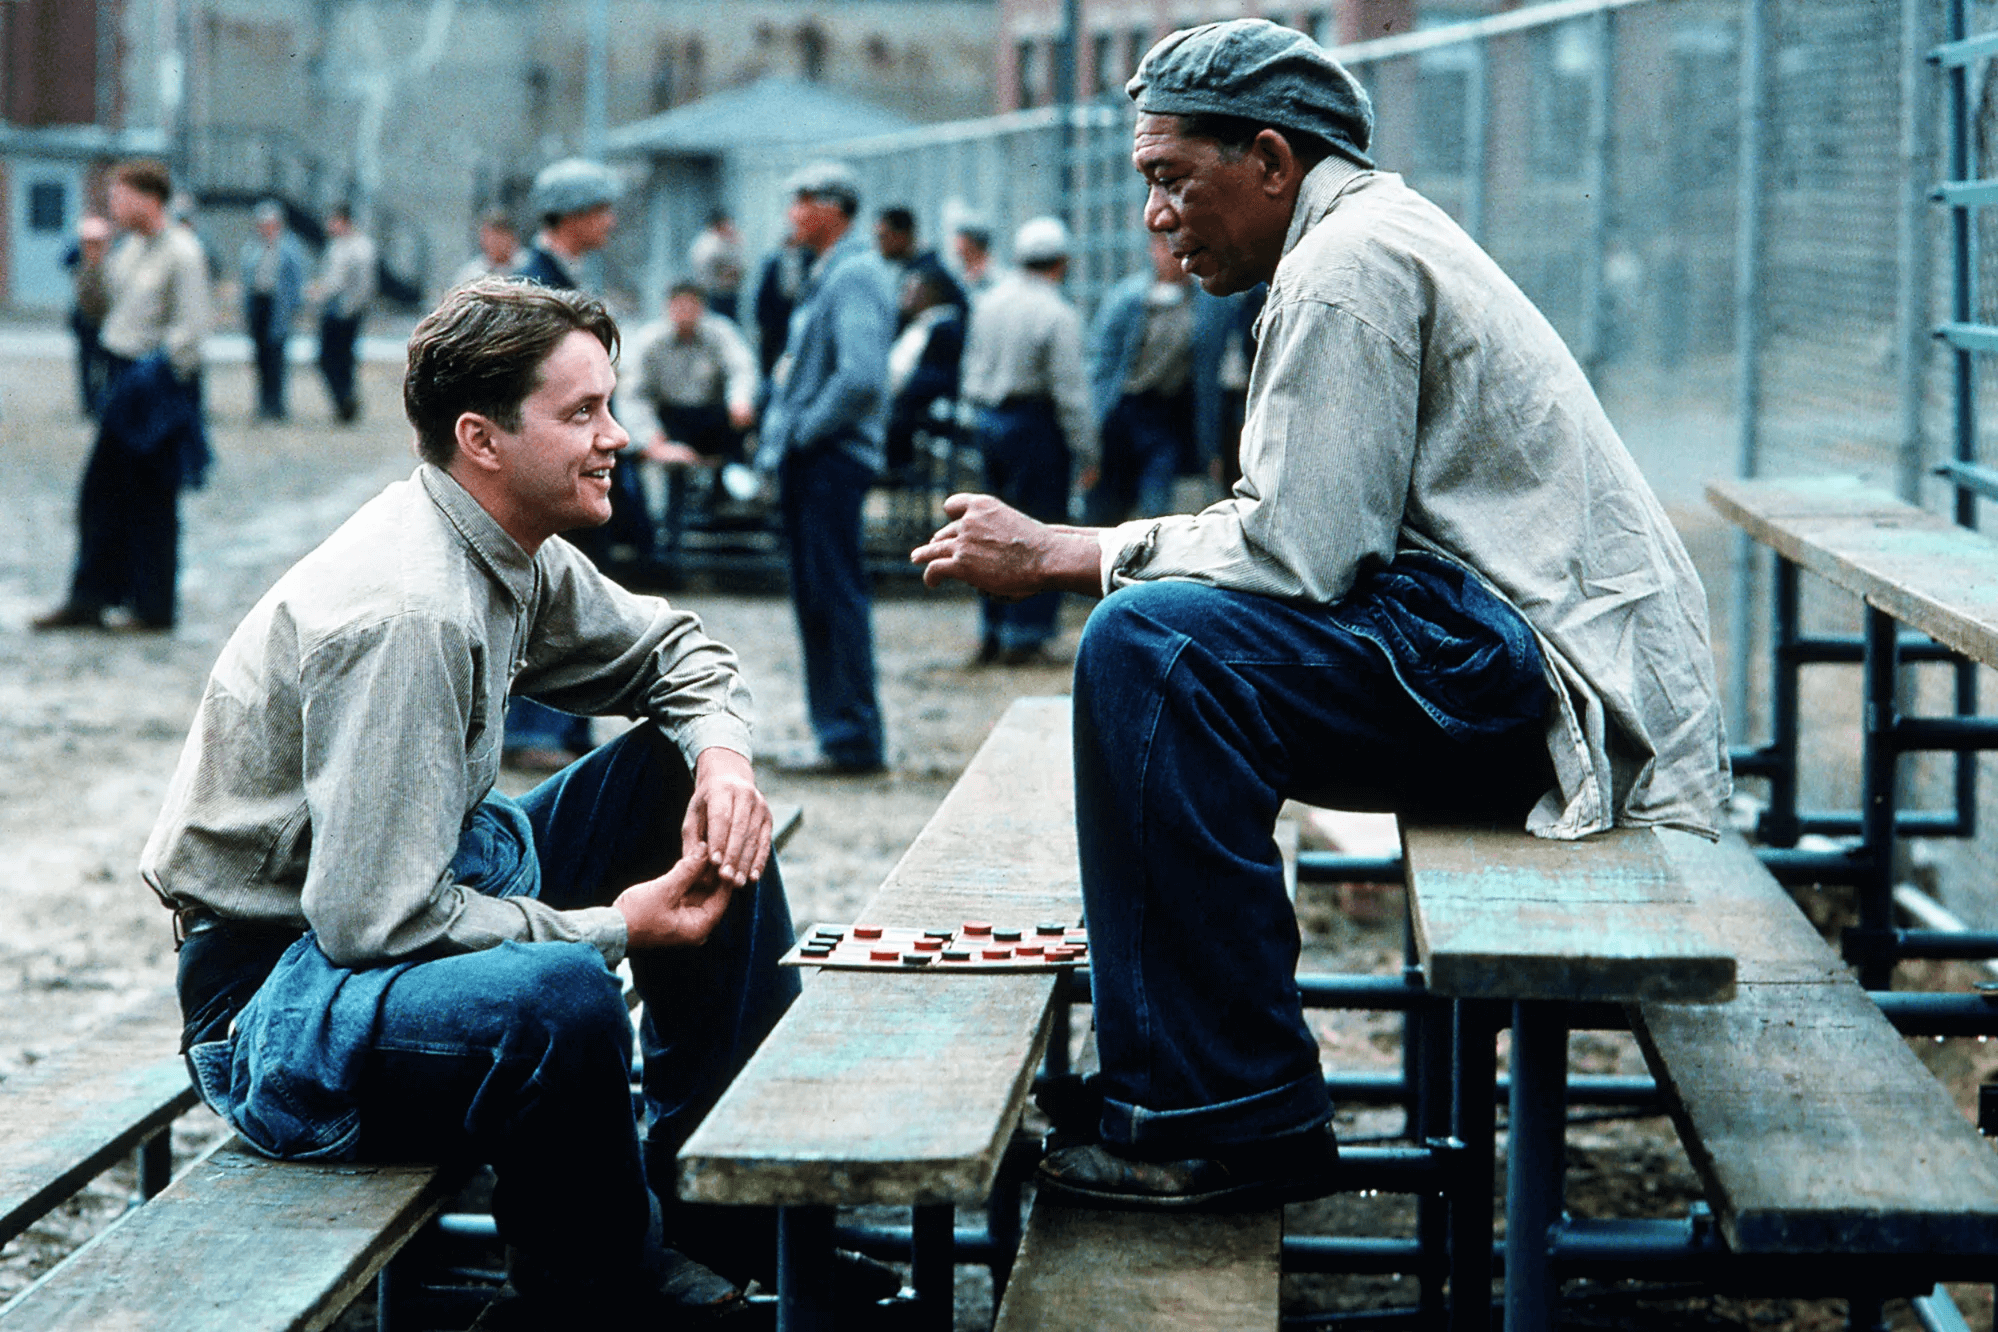 The Shawshank Redemption plot vs story examples